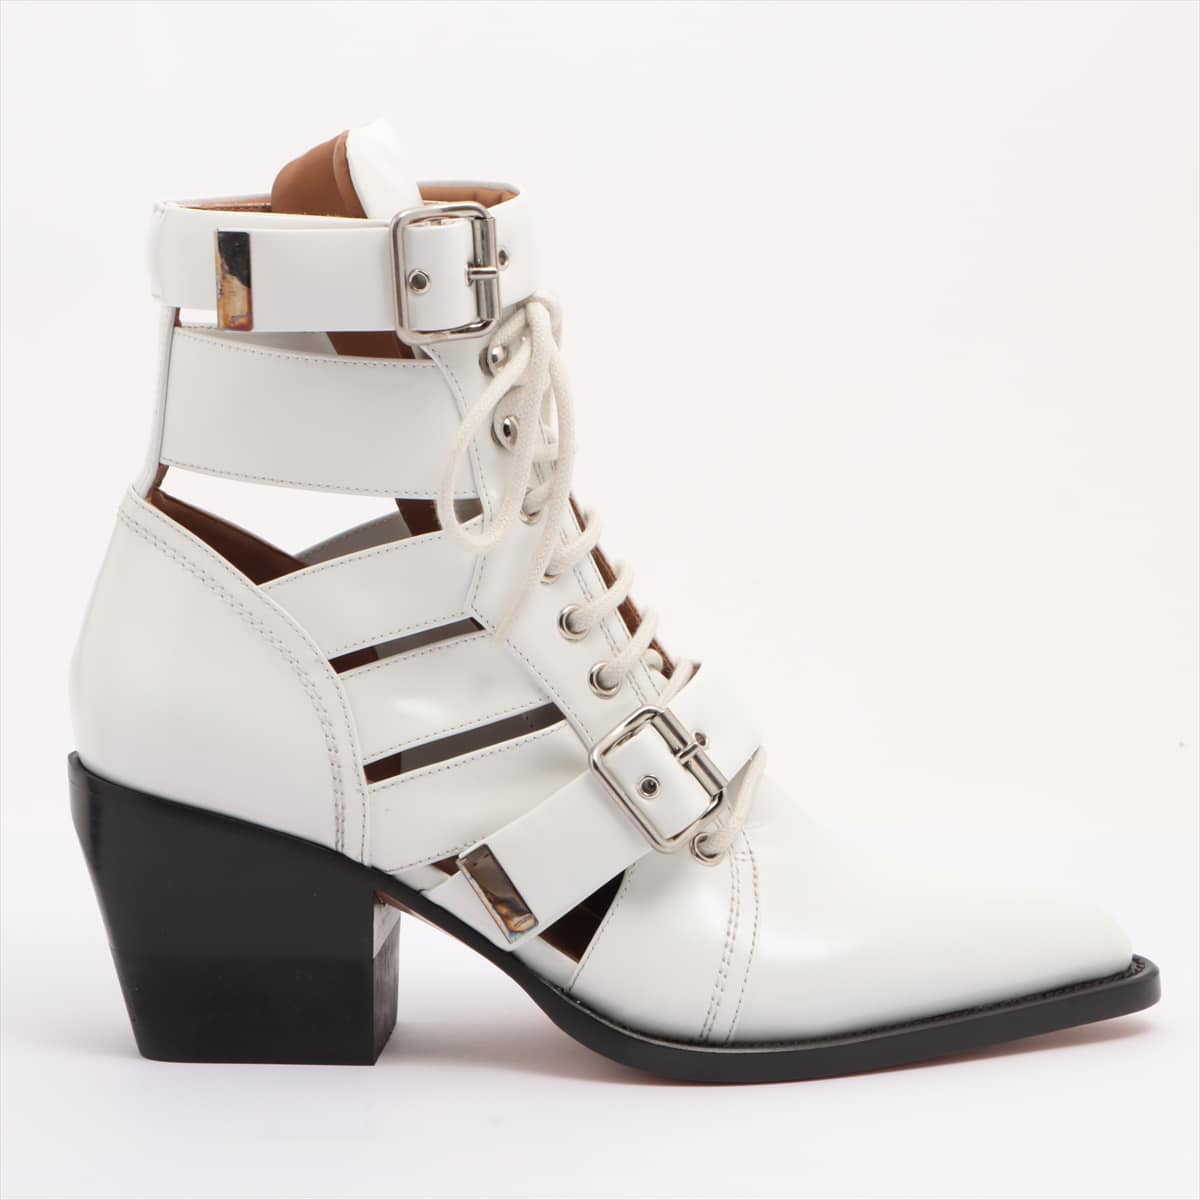 Chloe RYLEE Leather Boots 40 Ladies' White